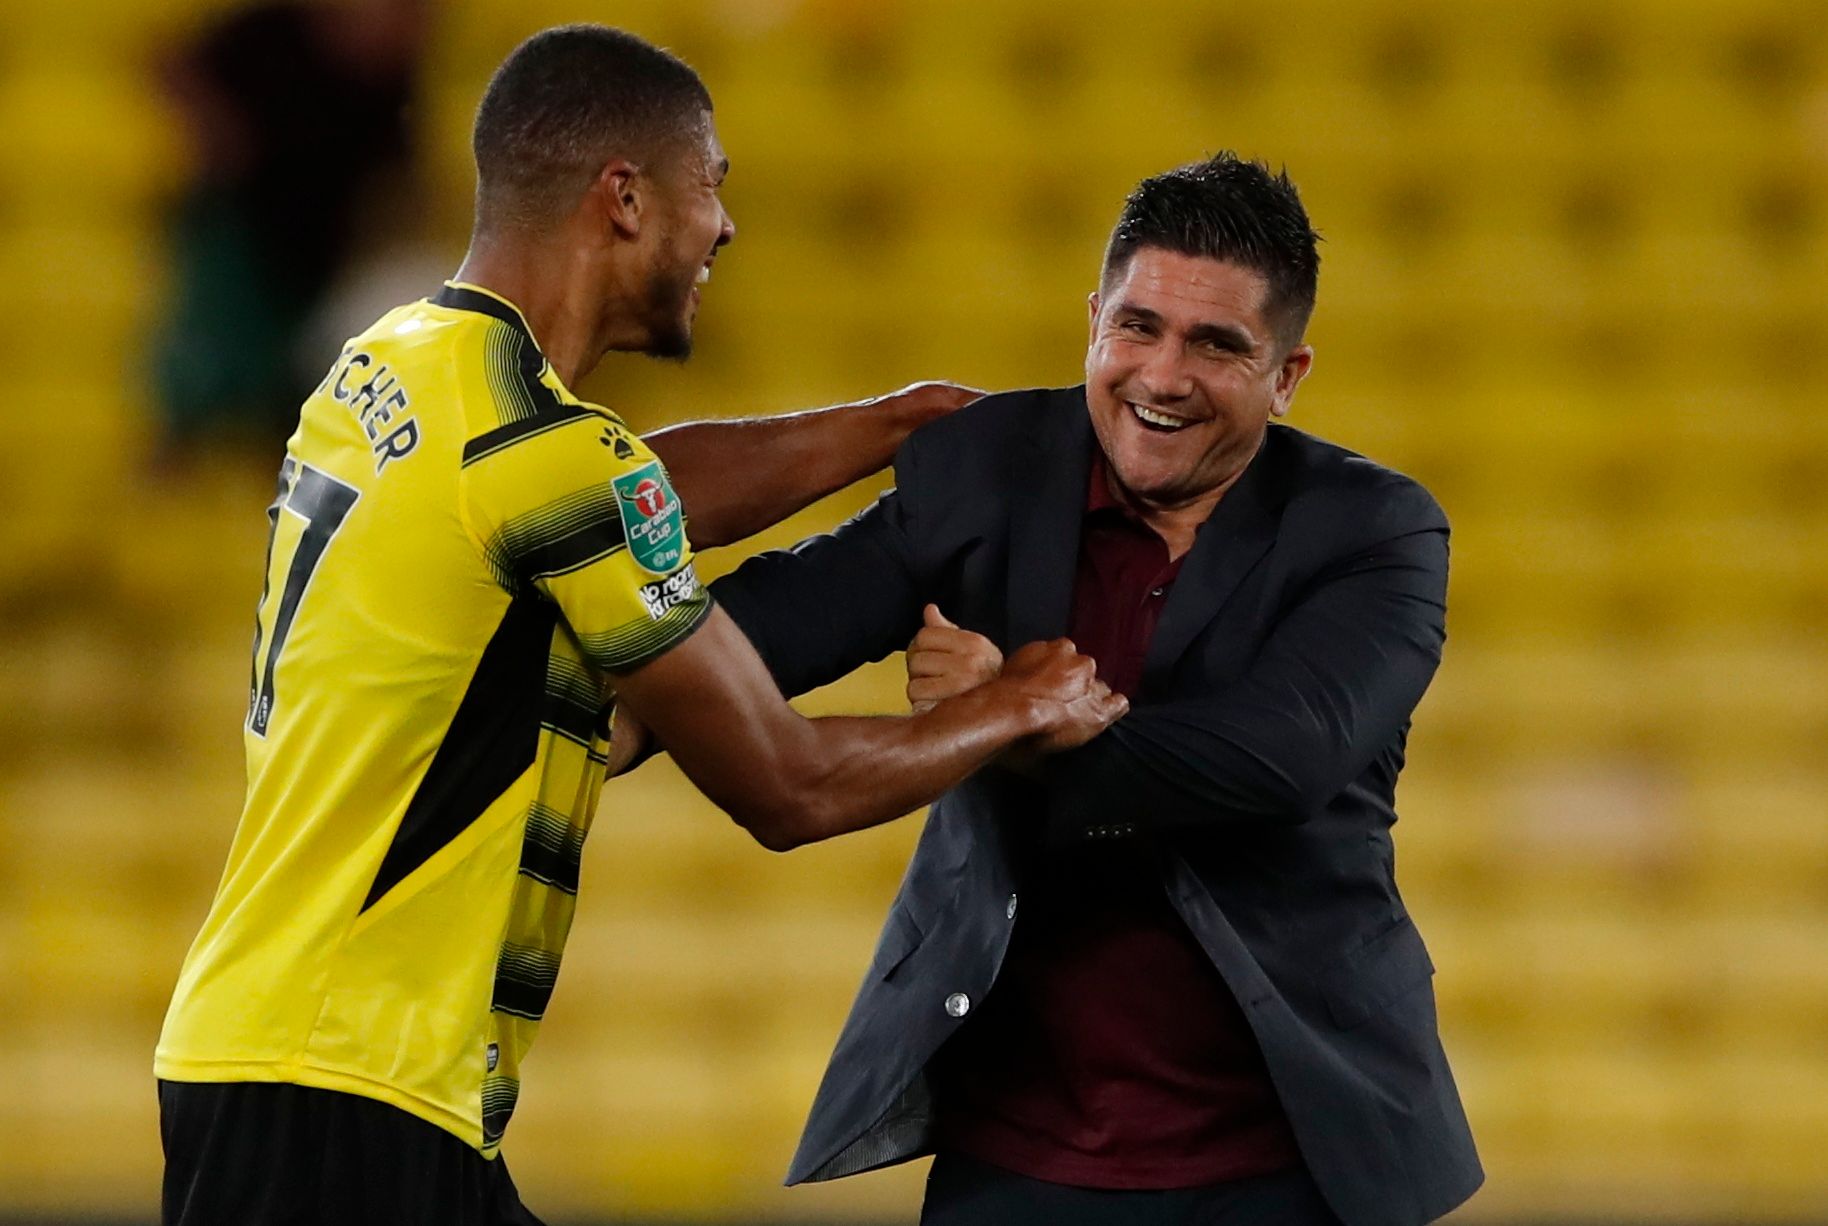 Soccer - England - Carabao Cup Second Round - Watford v Crystal Palace - Vicarage Road, Watford, Britain - August 24, 2021  Watford manager Xisco Munoz celebrates with Ashley Fletcher after the match Action Images via Reuters/Andrew Couldridge